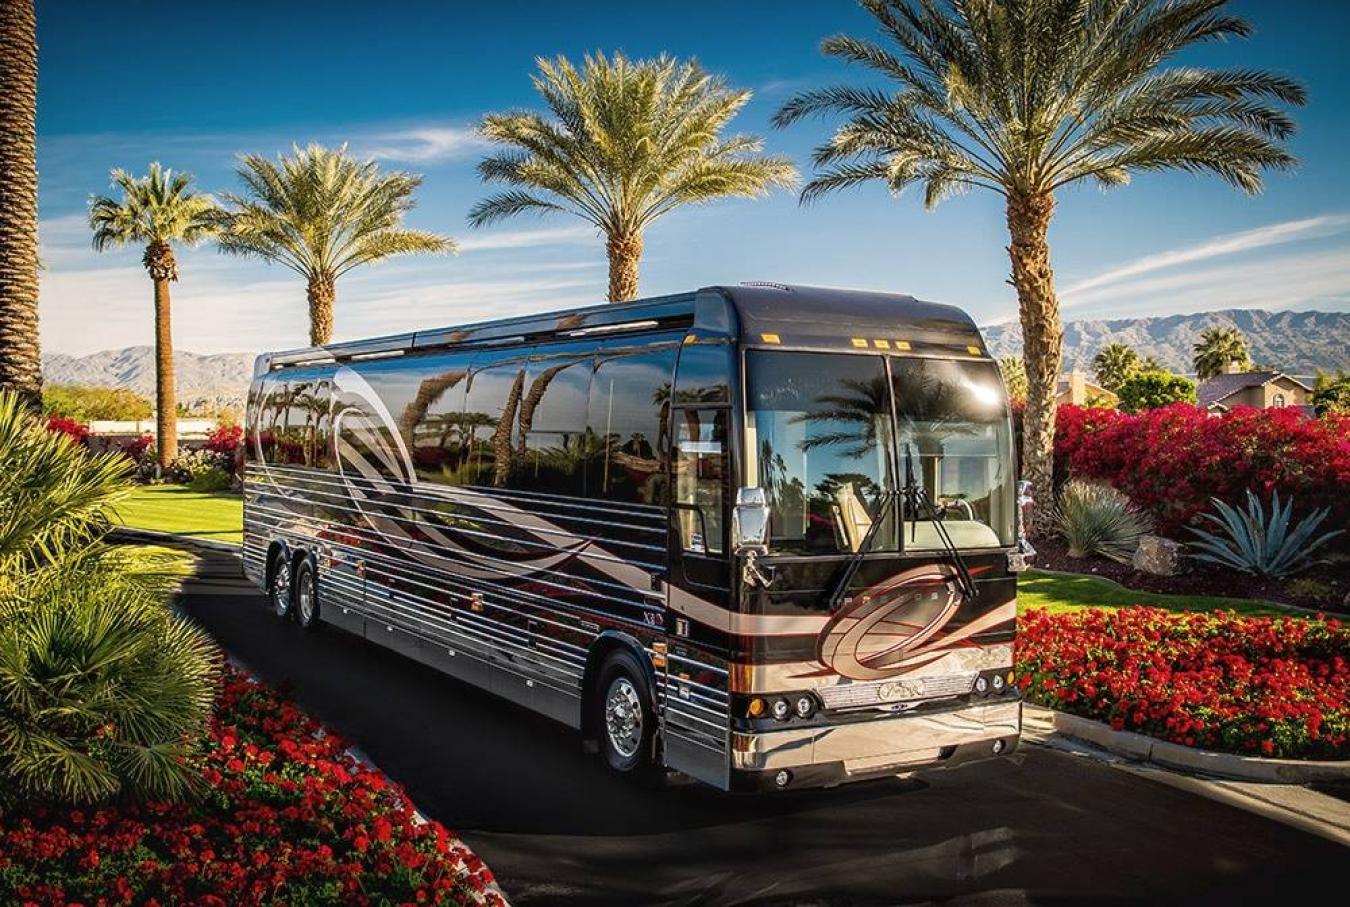 An Emerald Luxury Coach RV driving along a road lined with flowerbeds and palm trees